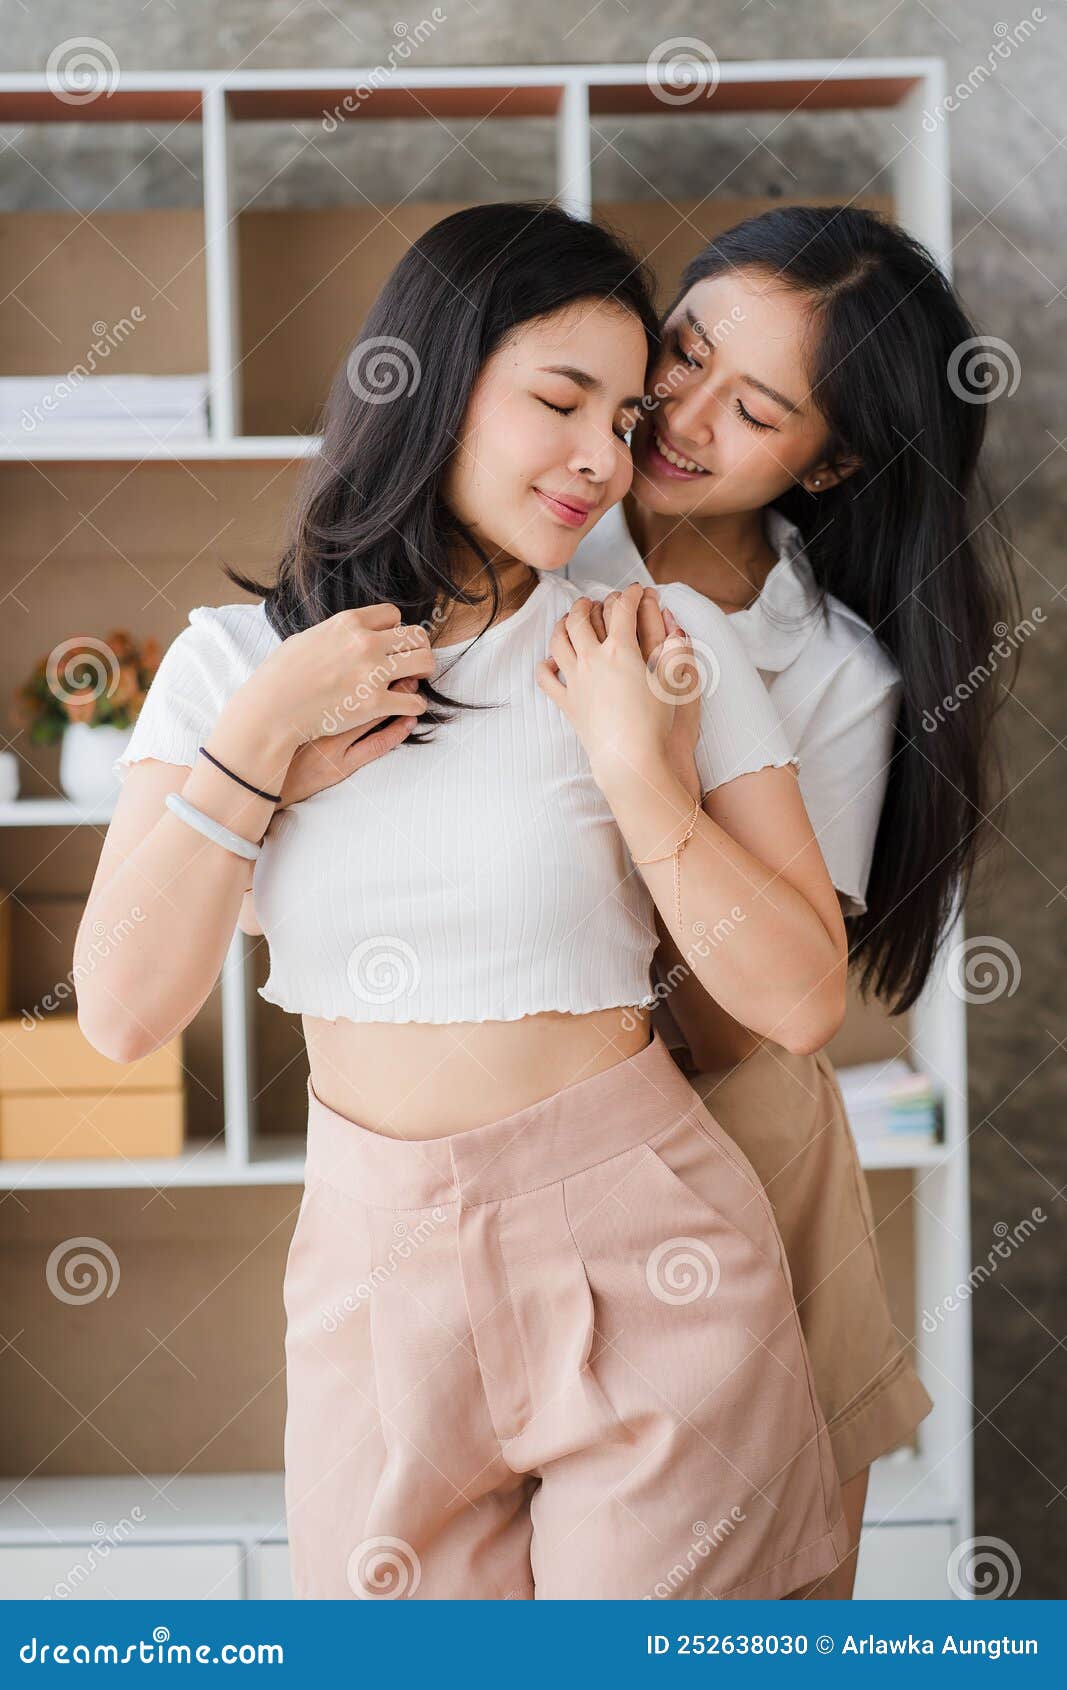 Lesbian Couple Concept Beautiful Asian Girllesbian Couple In A Room At 